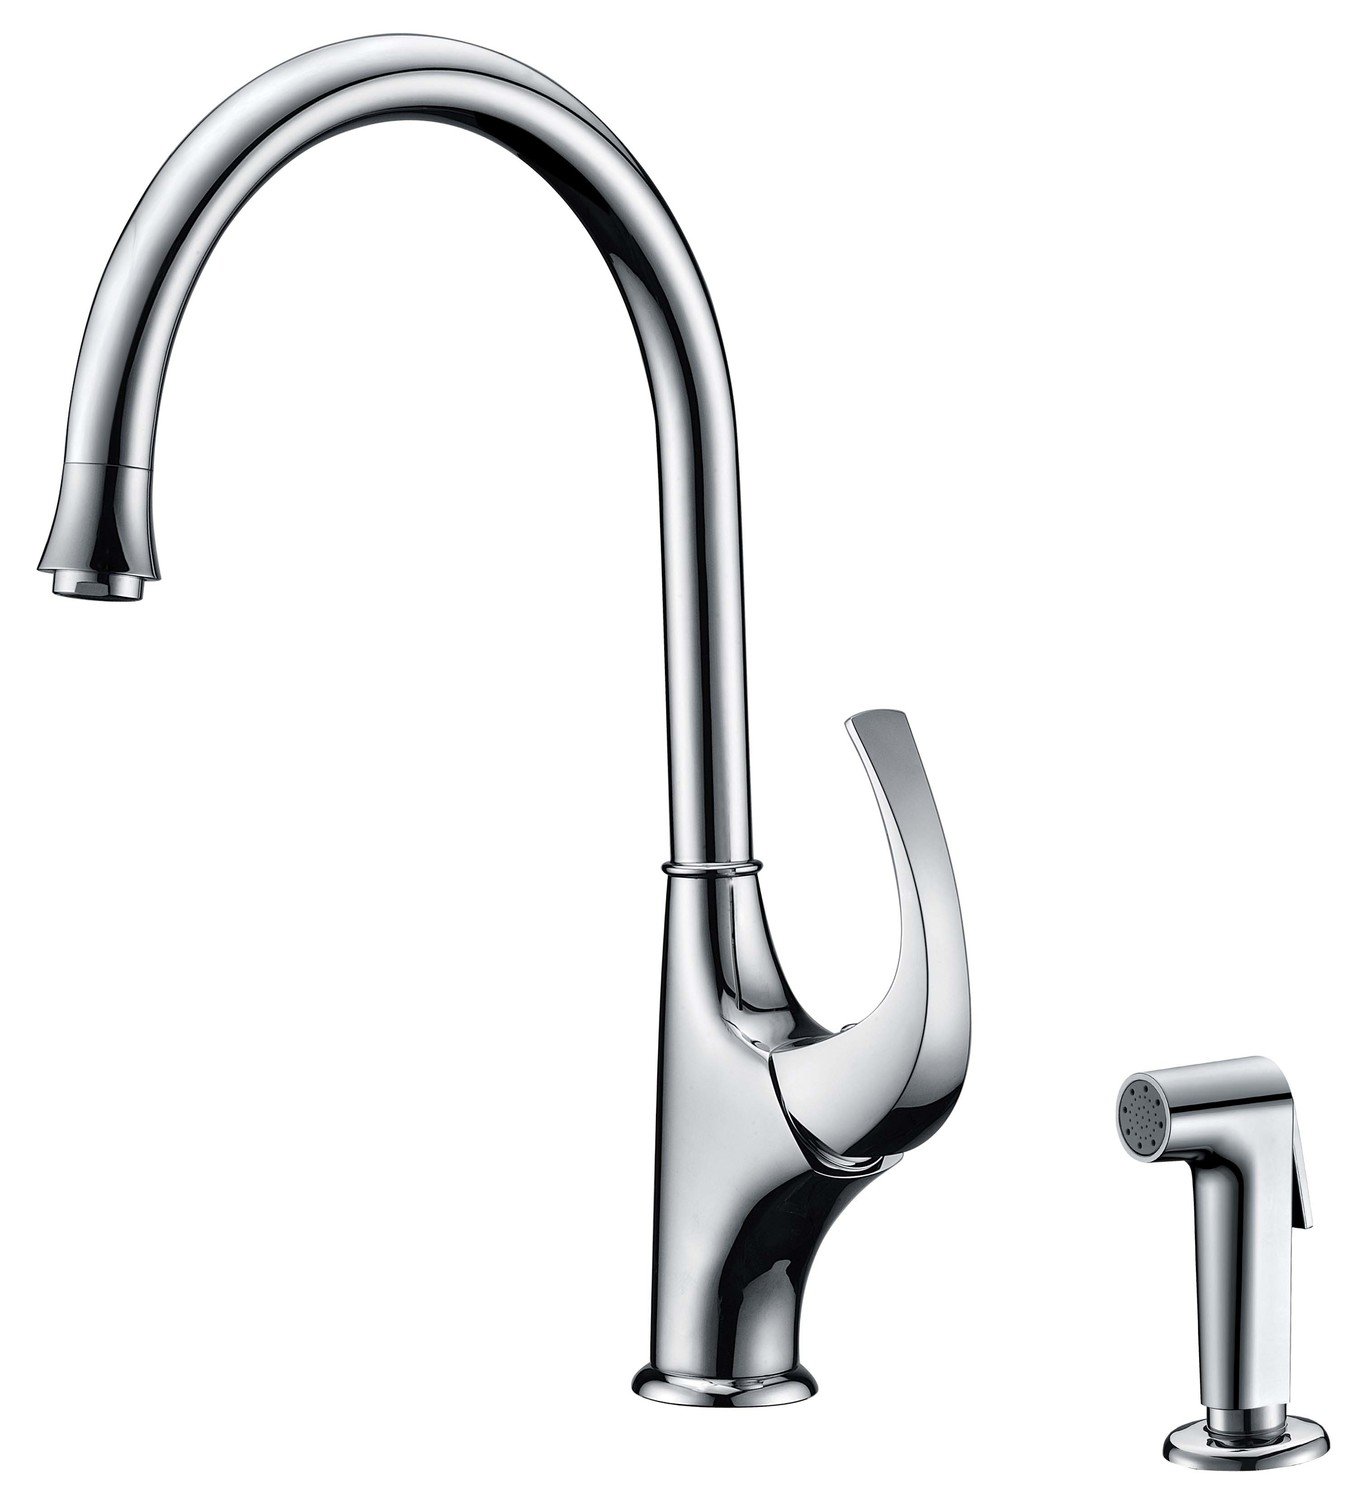 Single-handle kitchen faucet with side-spray